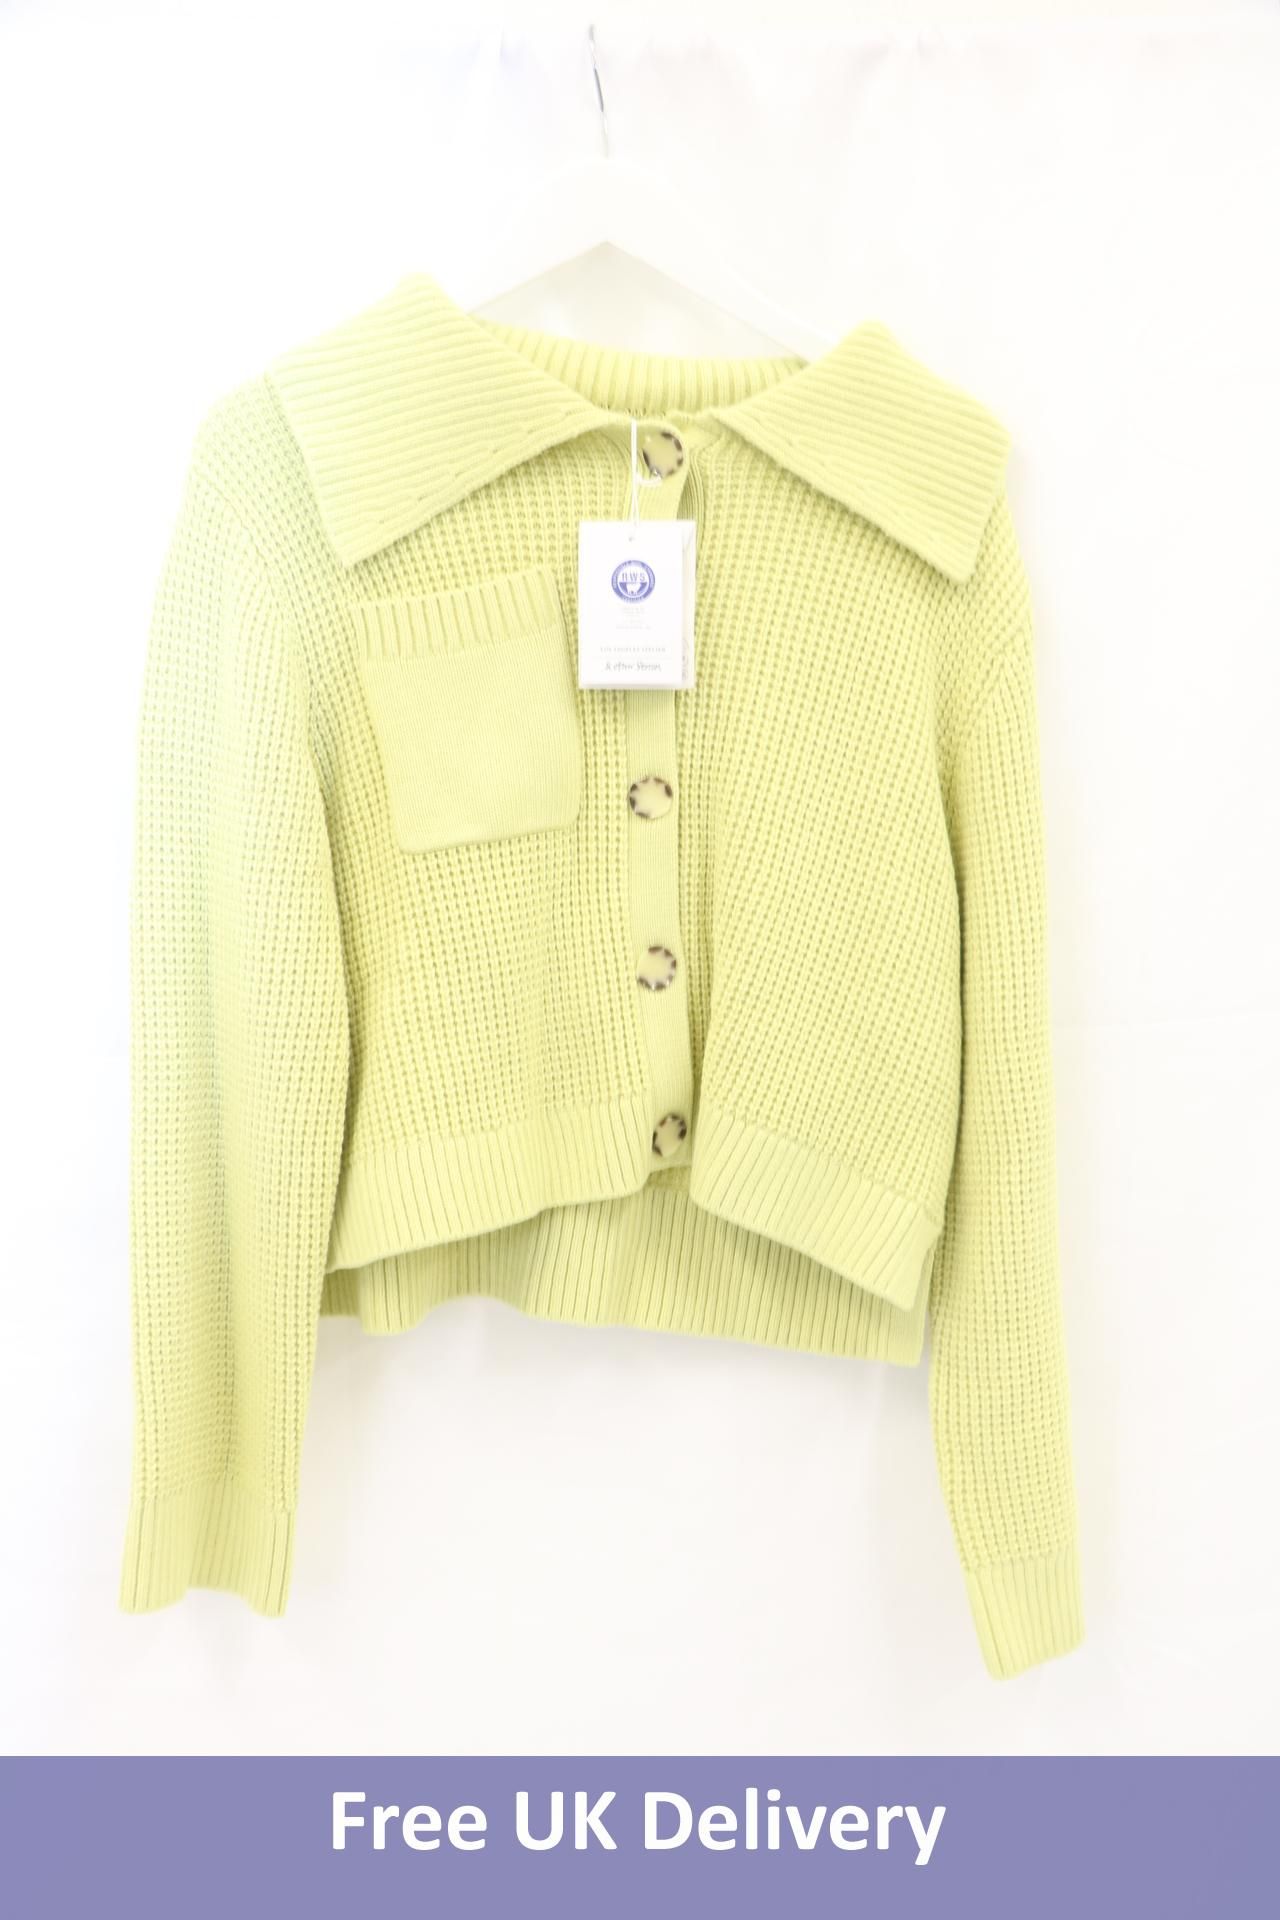 & Other Stories Knitted Short Cardigan, Chartreuse, Size EUR M